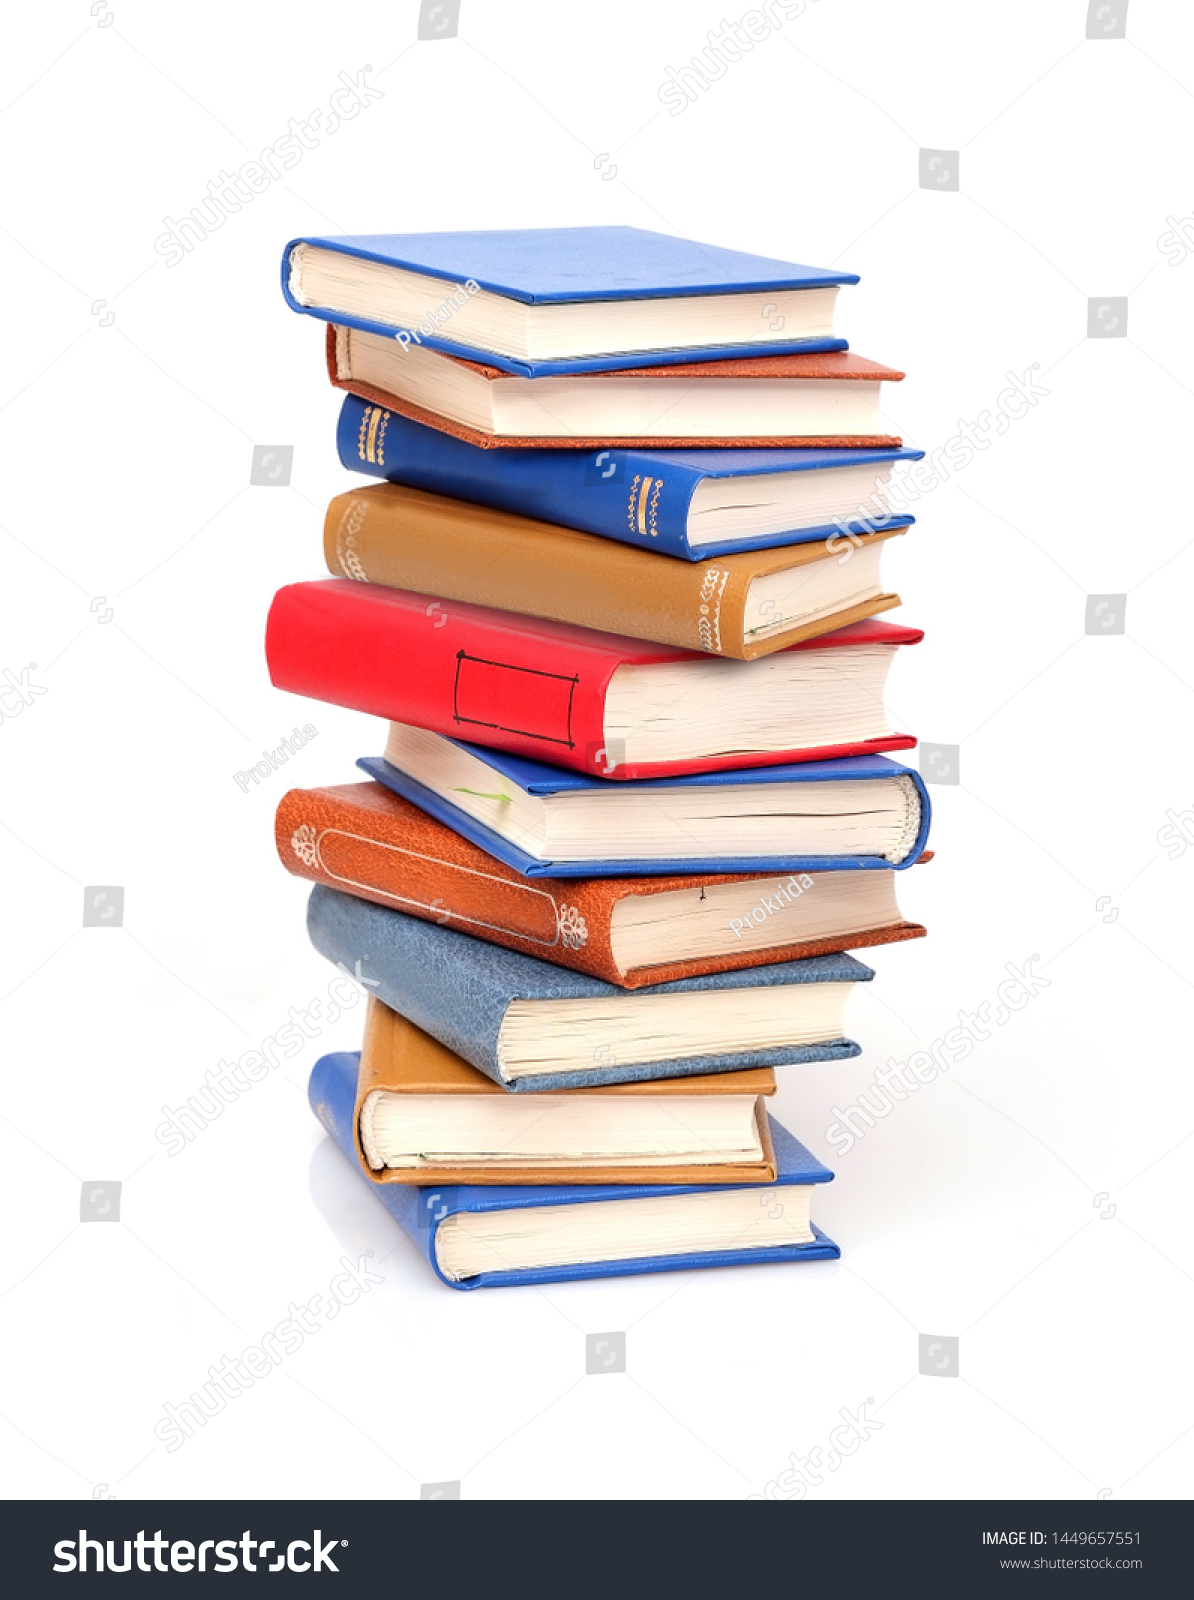 Stack of books isolated on white background	 #1449657551